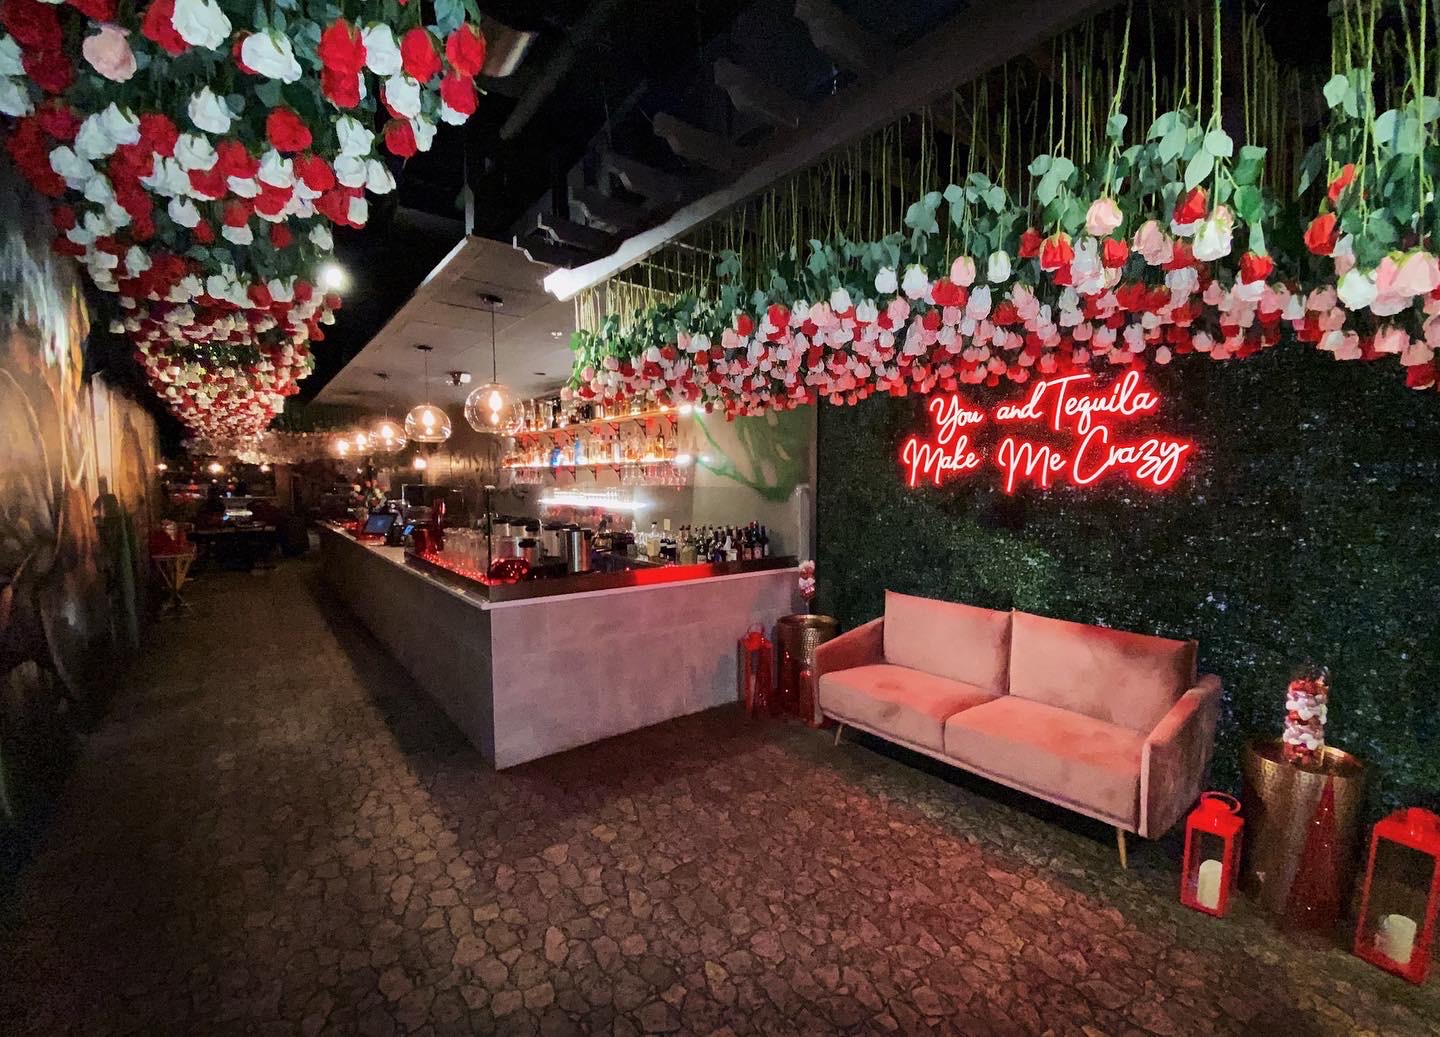 A bar with red and white roses hanging from the ceiling, plus slate features and a red neon sign on the wall.